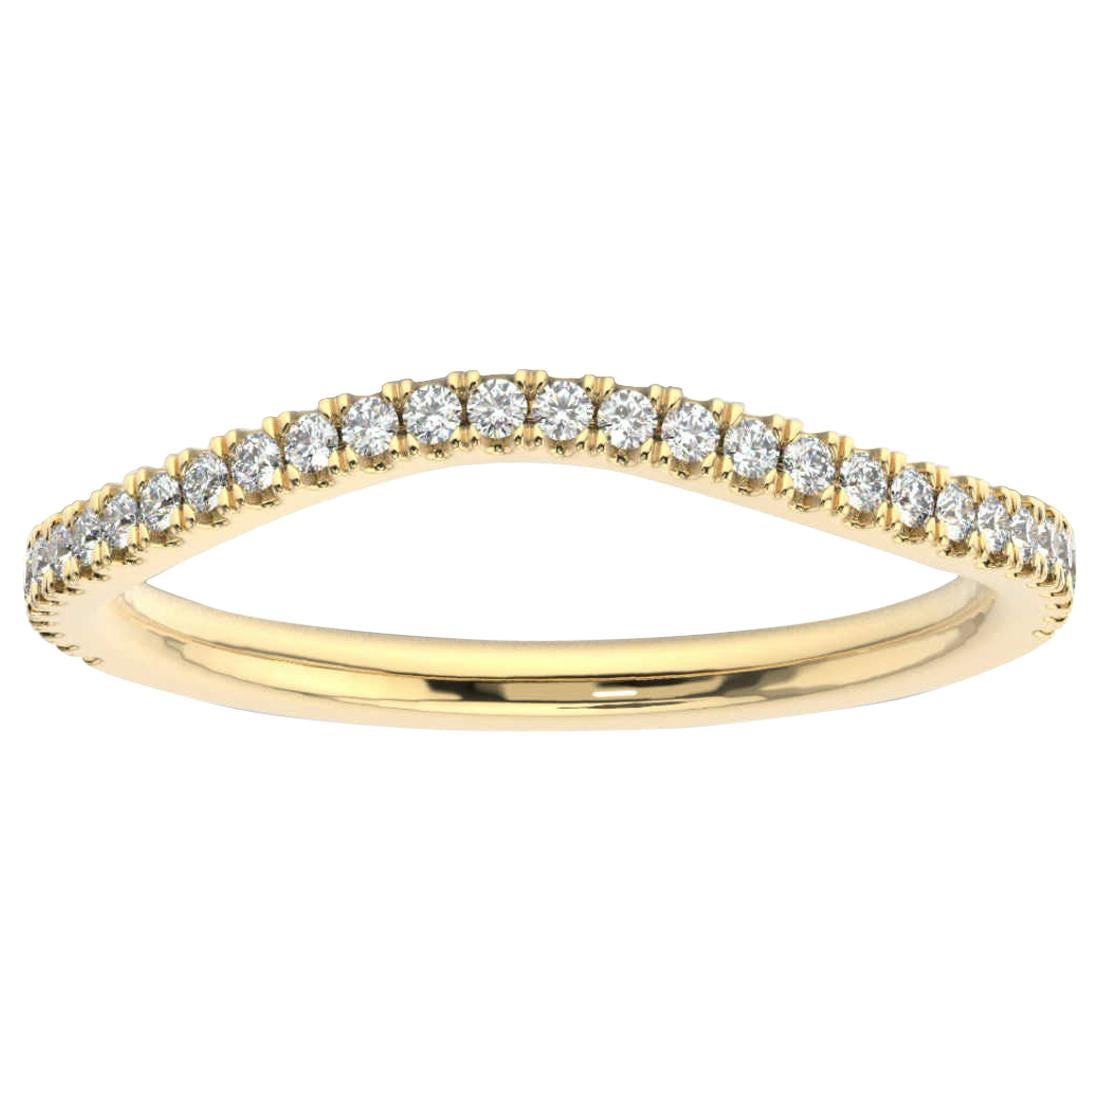 18K Yellow Gold Frances Petite Curve Diamond Ring '1/5 Ct. Tw' For Sale